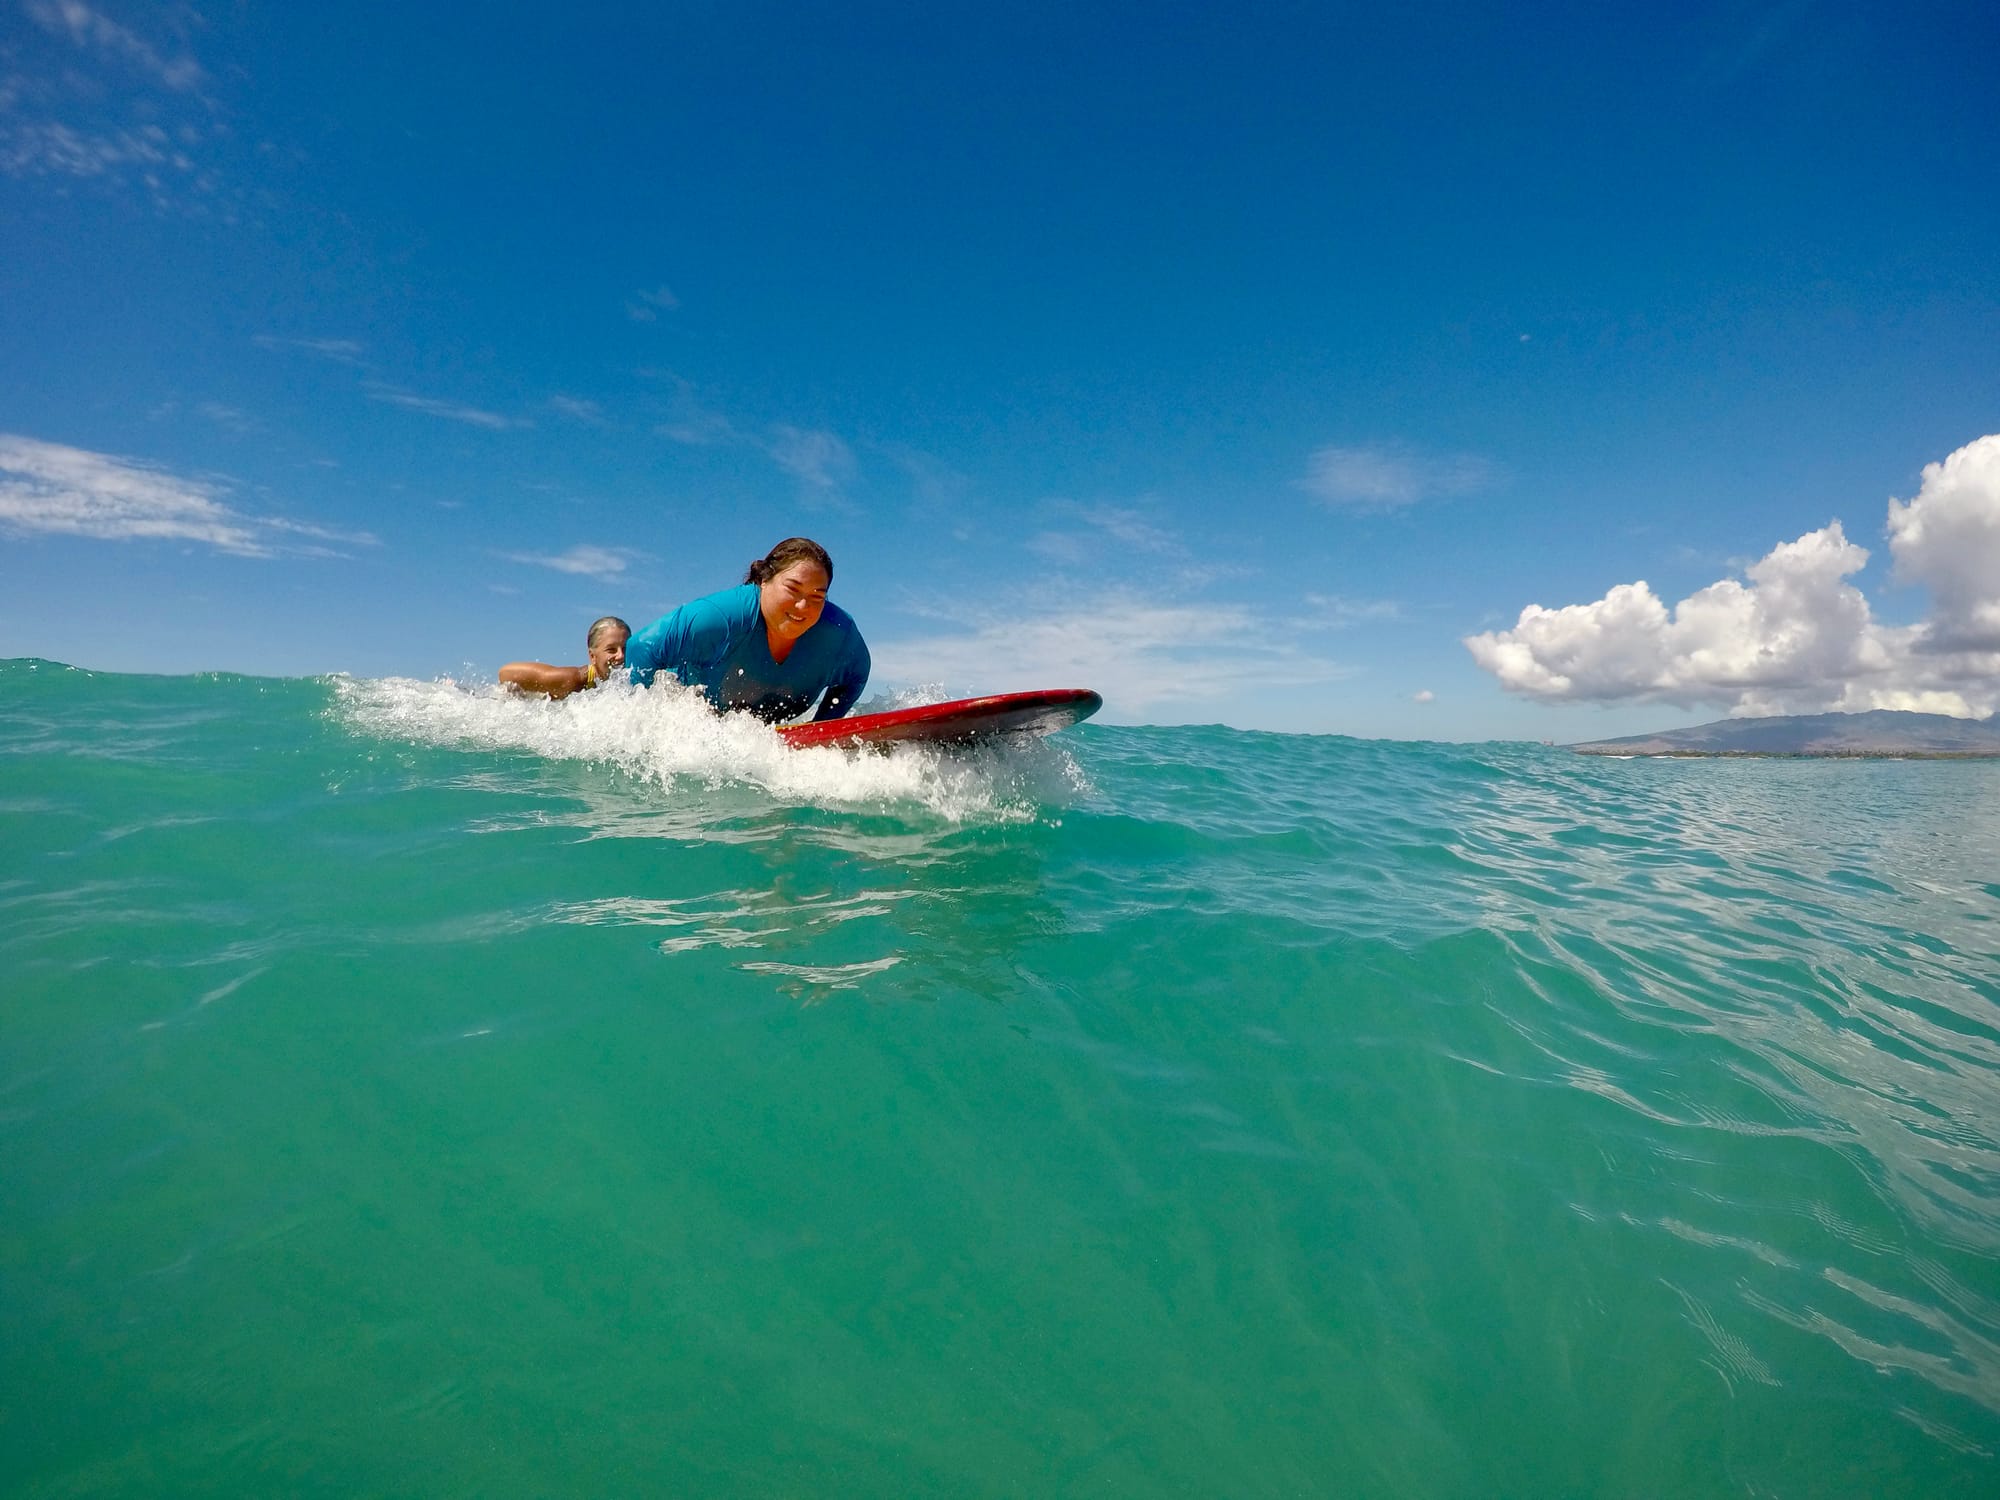 Wheelchair user riding a wave with an adaptive surfing lesson